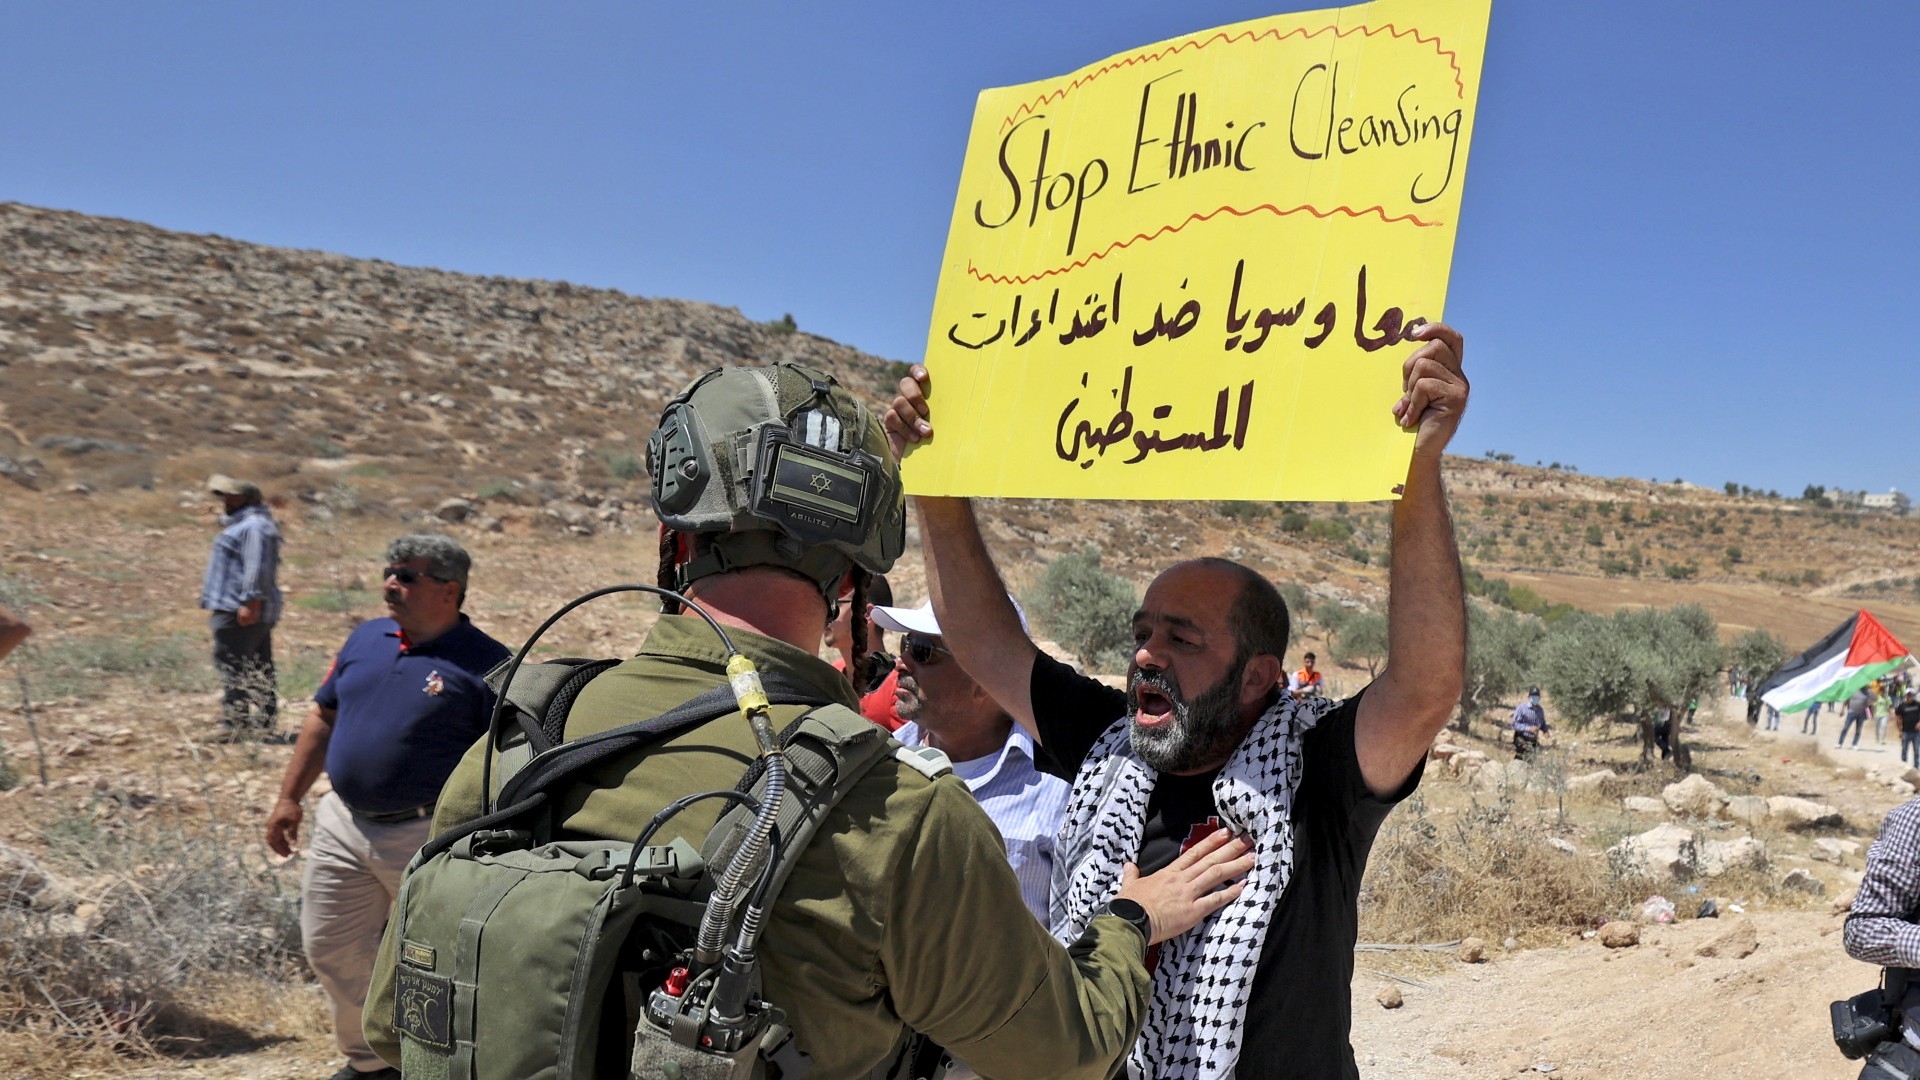 Israeli forces contain Palestinian protesters during a demonstration against settlement expansion, in the village of al-Mughayyir, east of Ramallah in the occupied West Bank, on July 29, 2022 (Abbas Momani/AFP)